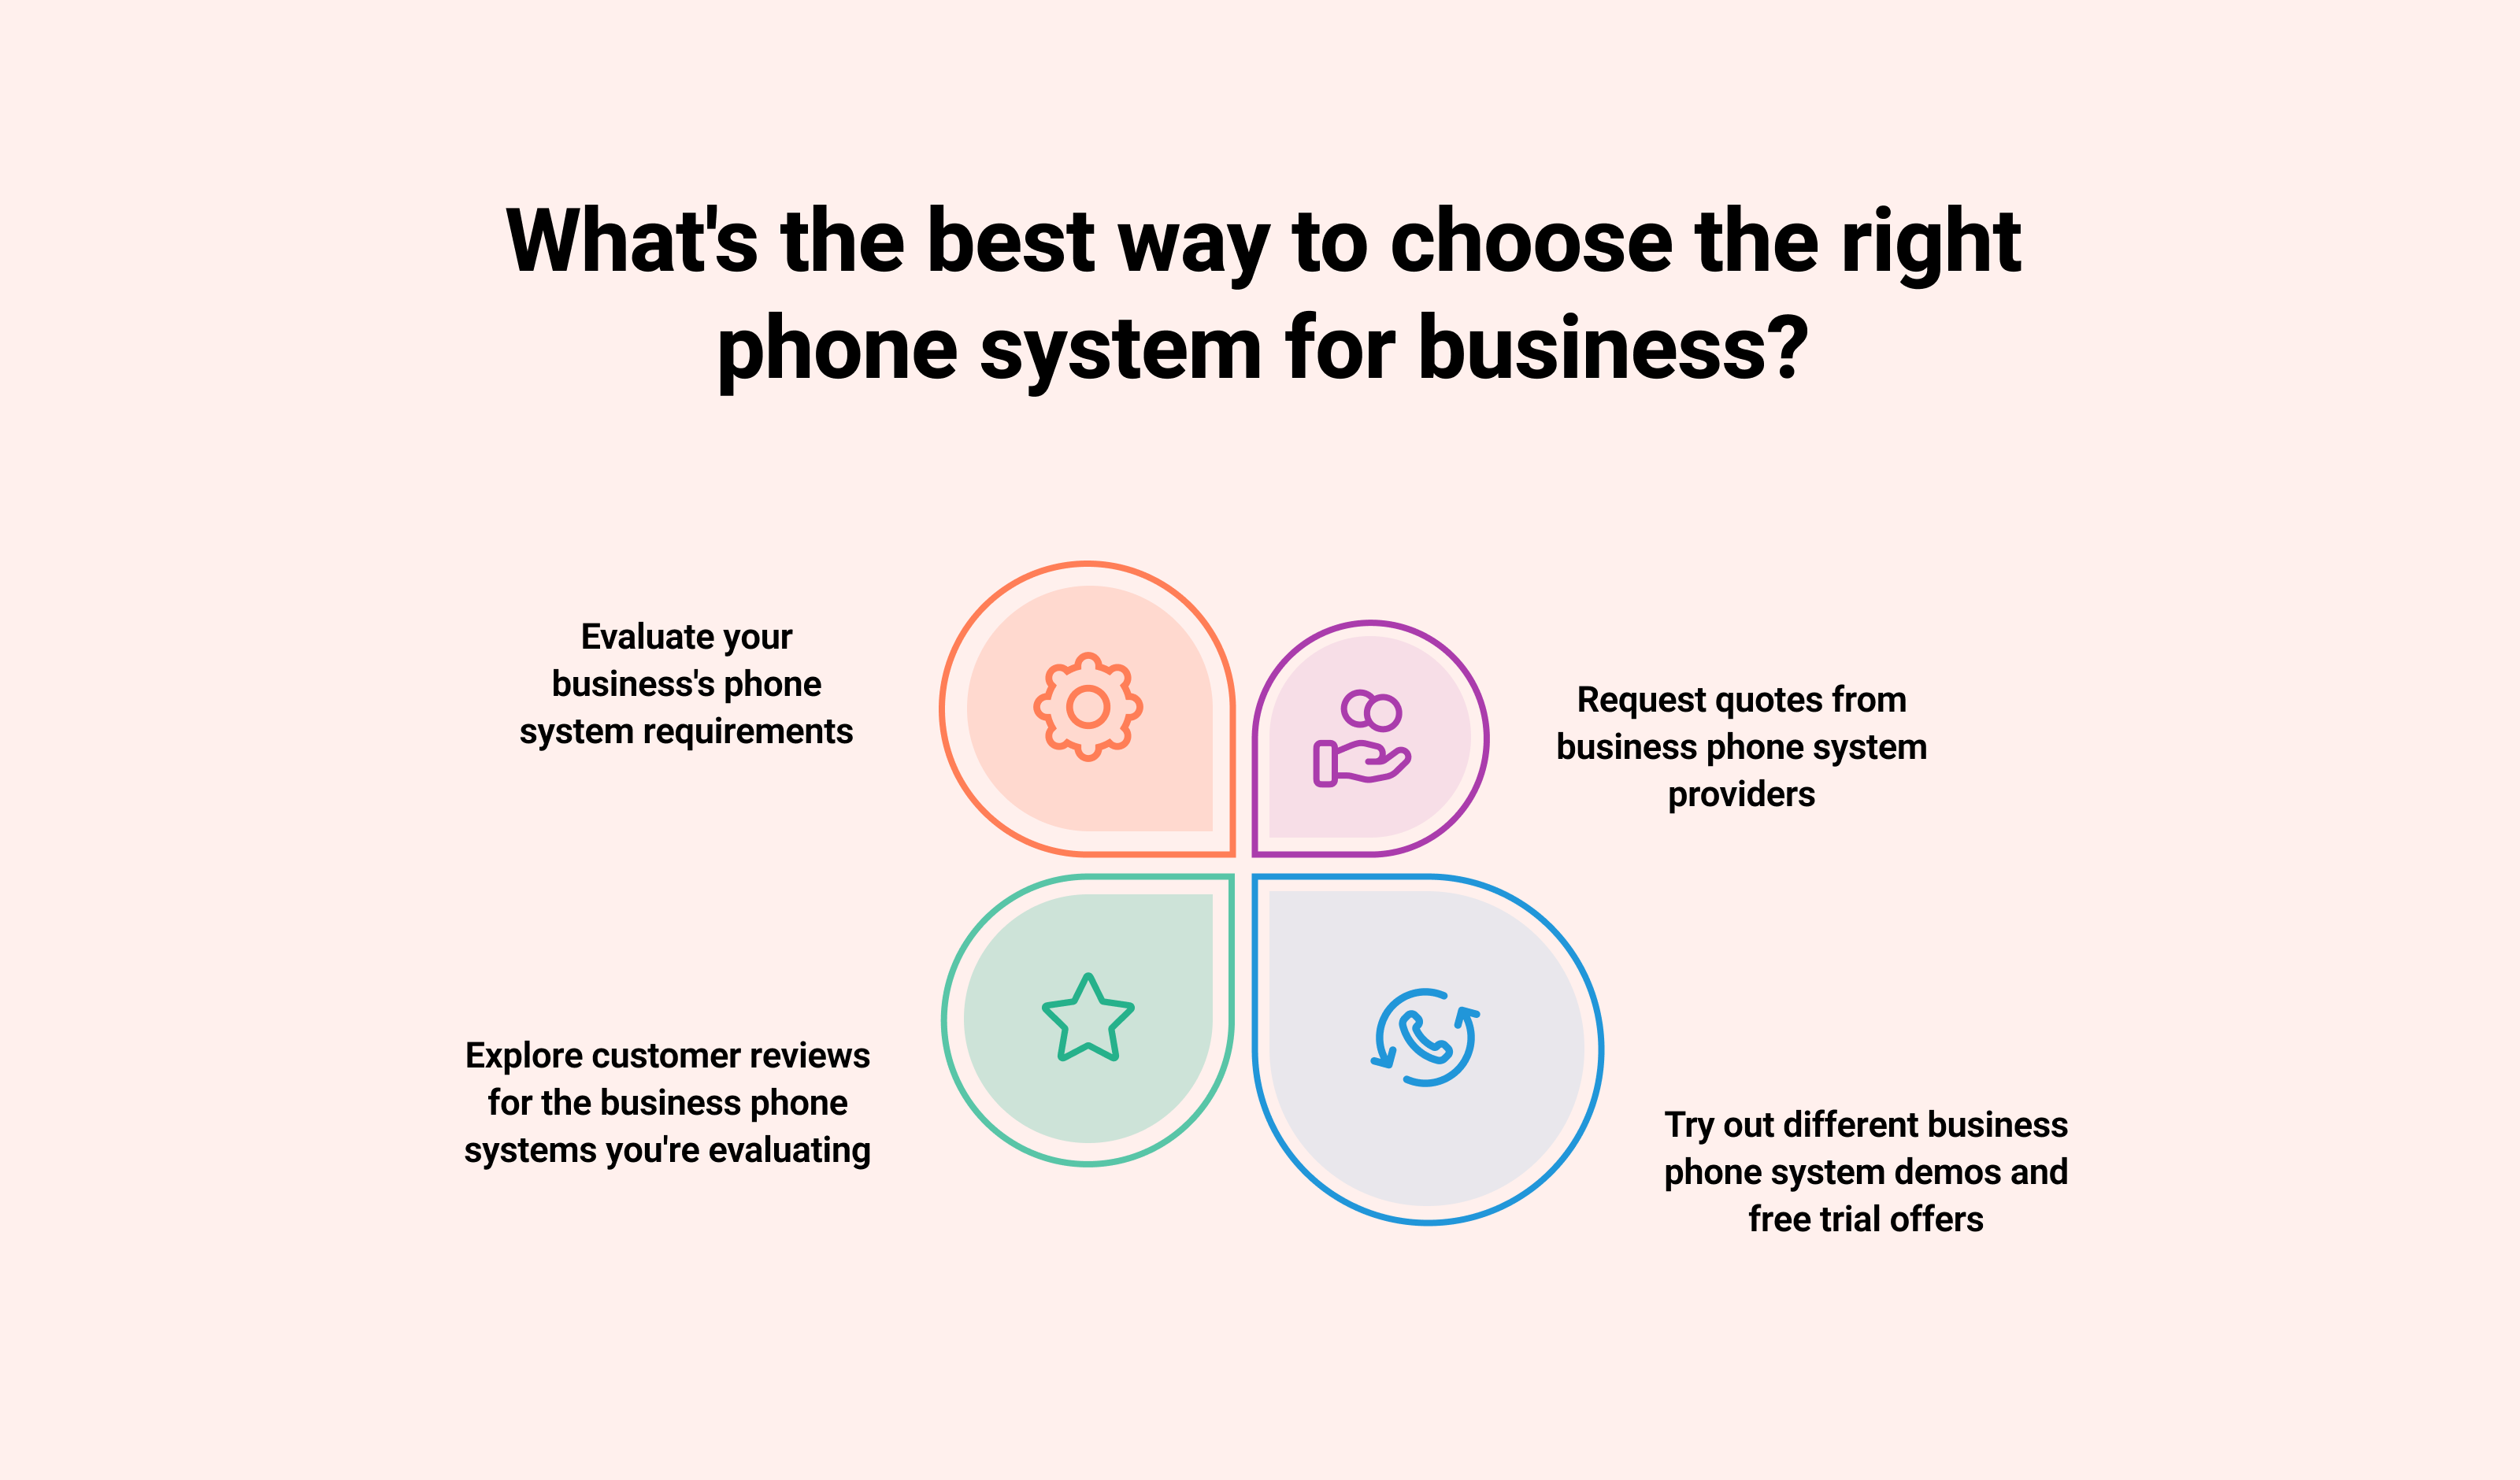 What's the Best Way to Choose the Right Phone System for Business?